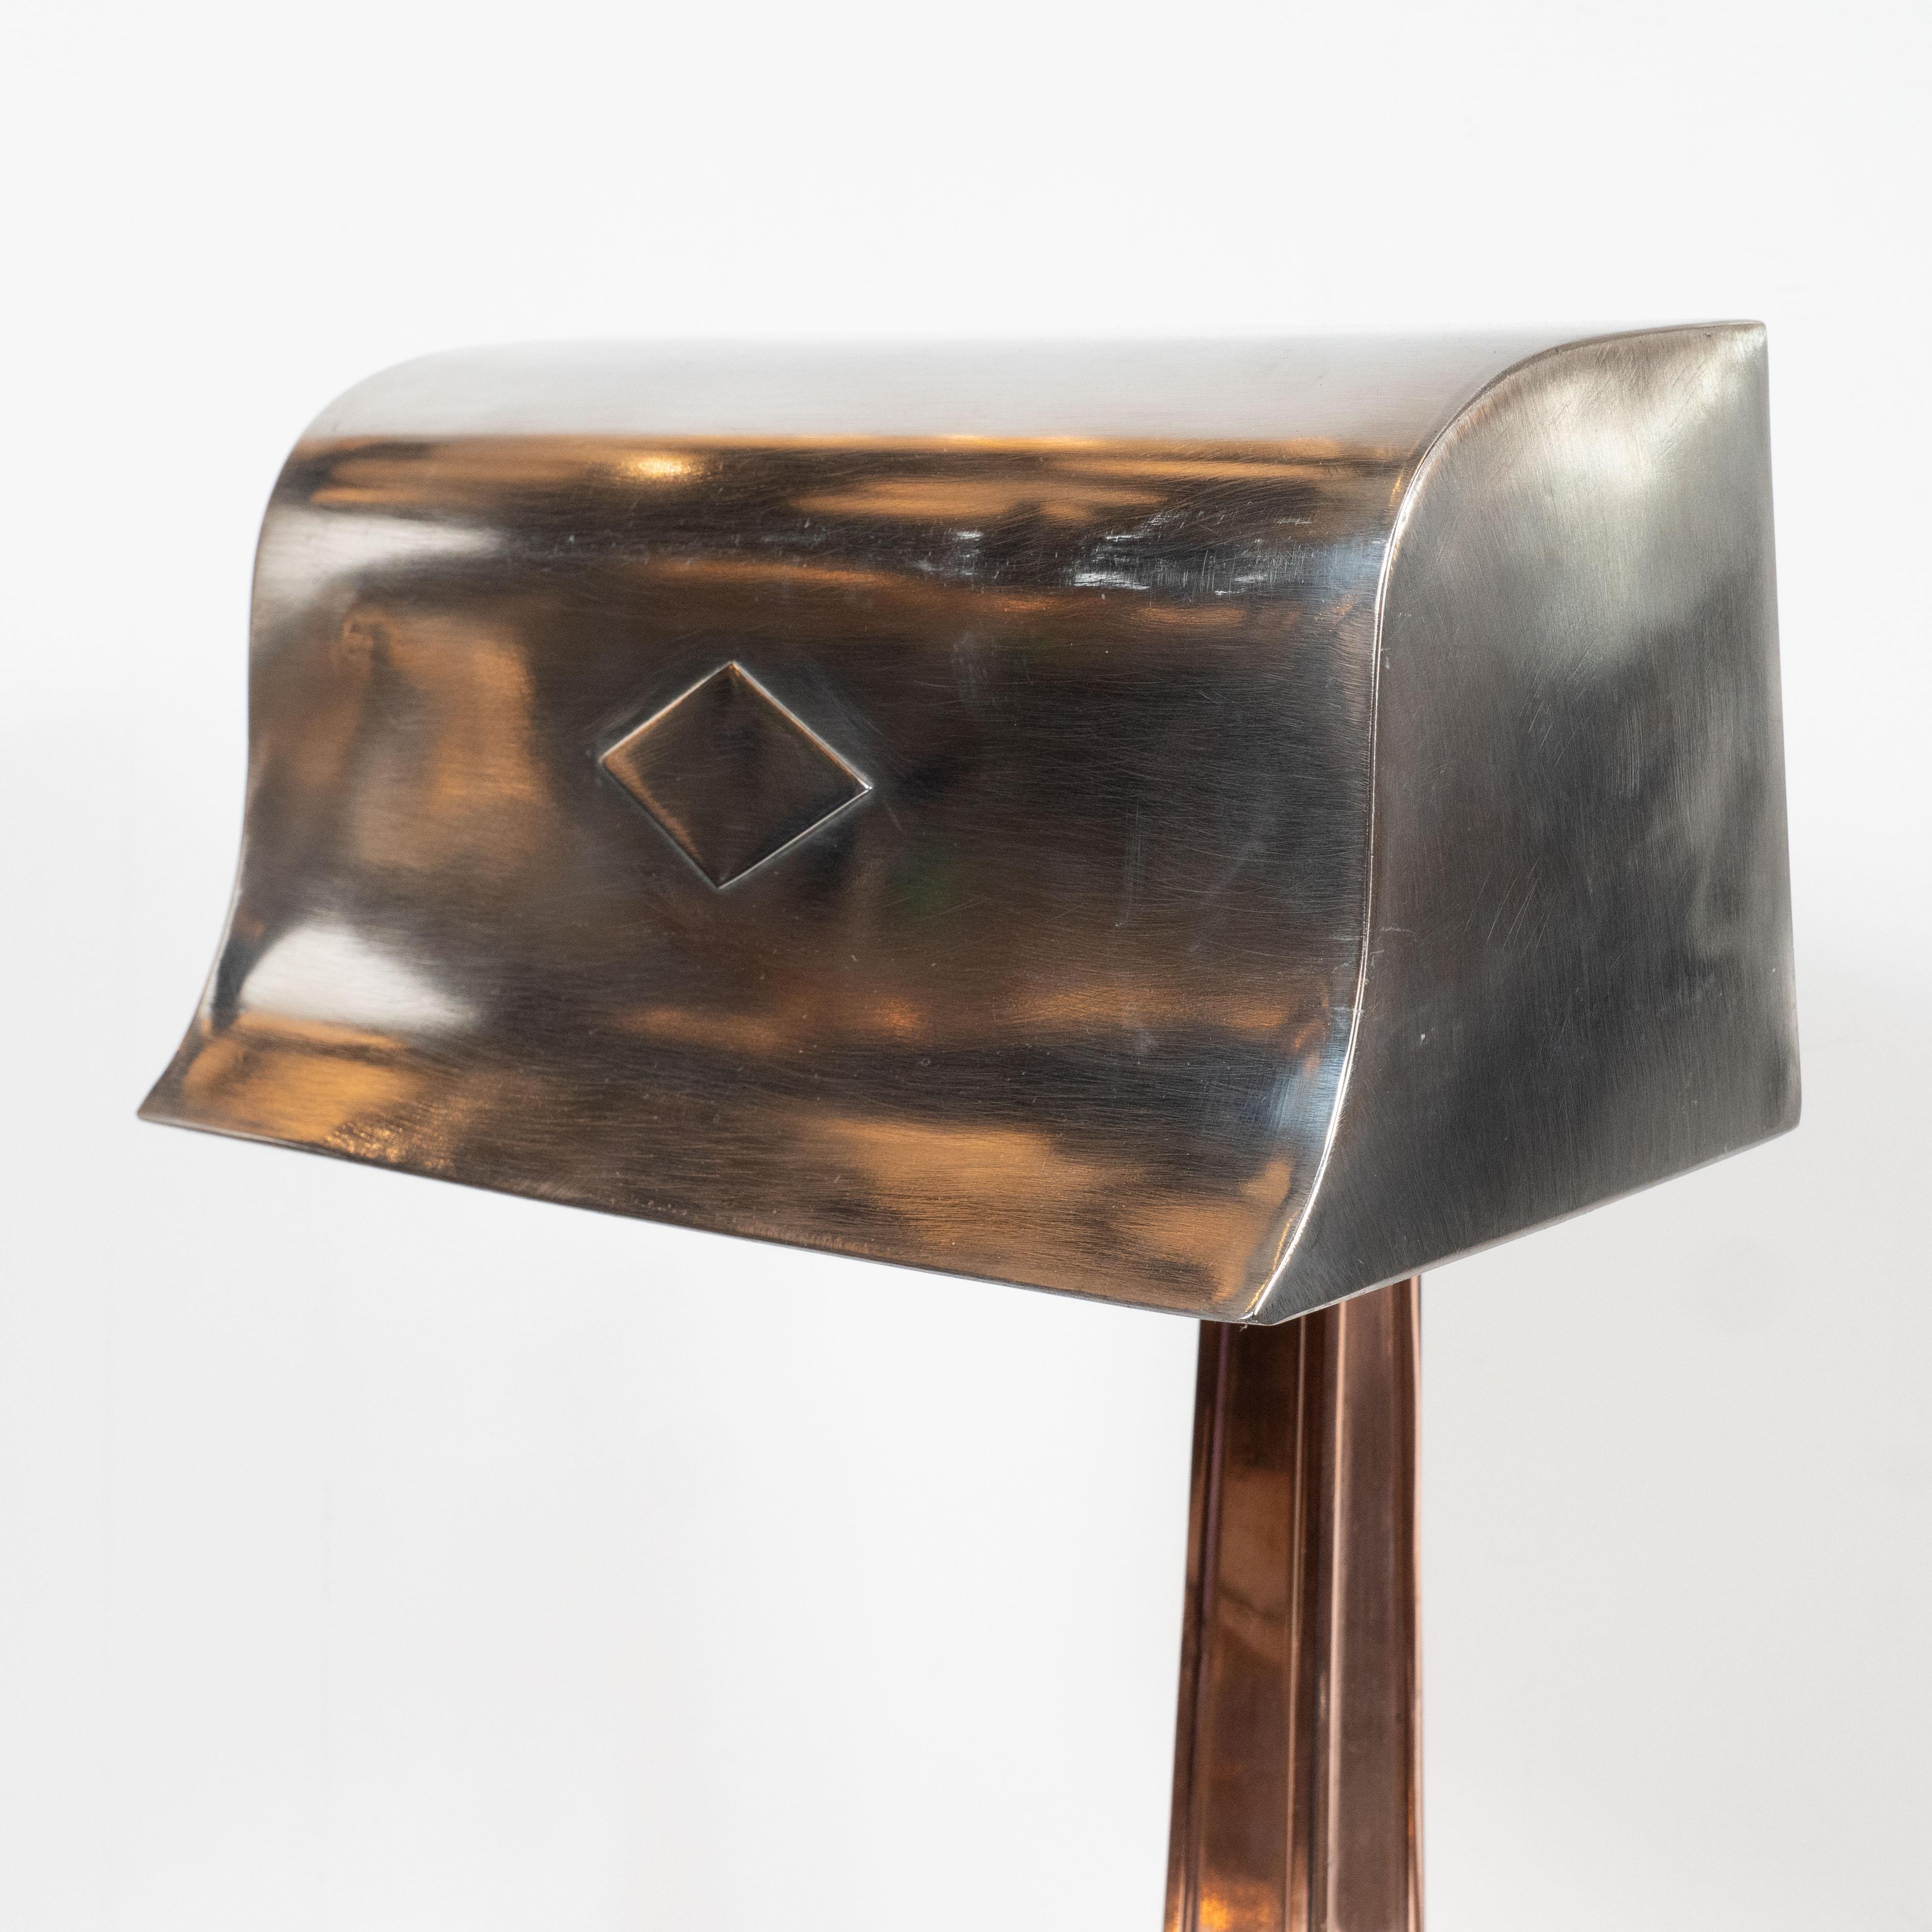 Early Art Deco Copper & Polished Aluminum Table Lamp with Cubist Embellishment For Sale 4